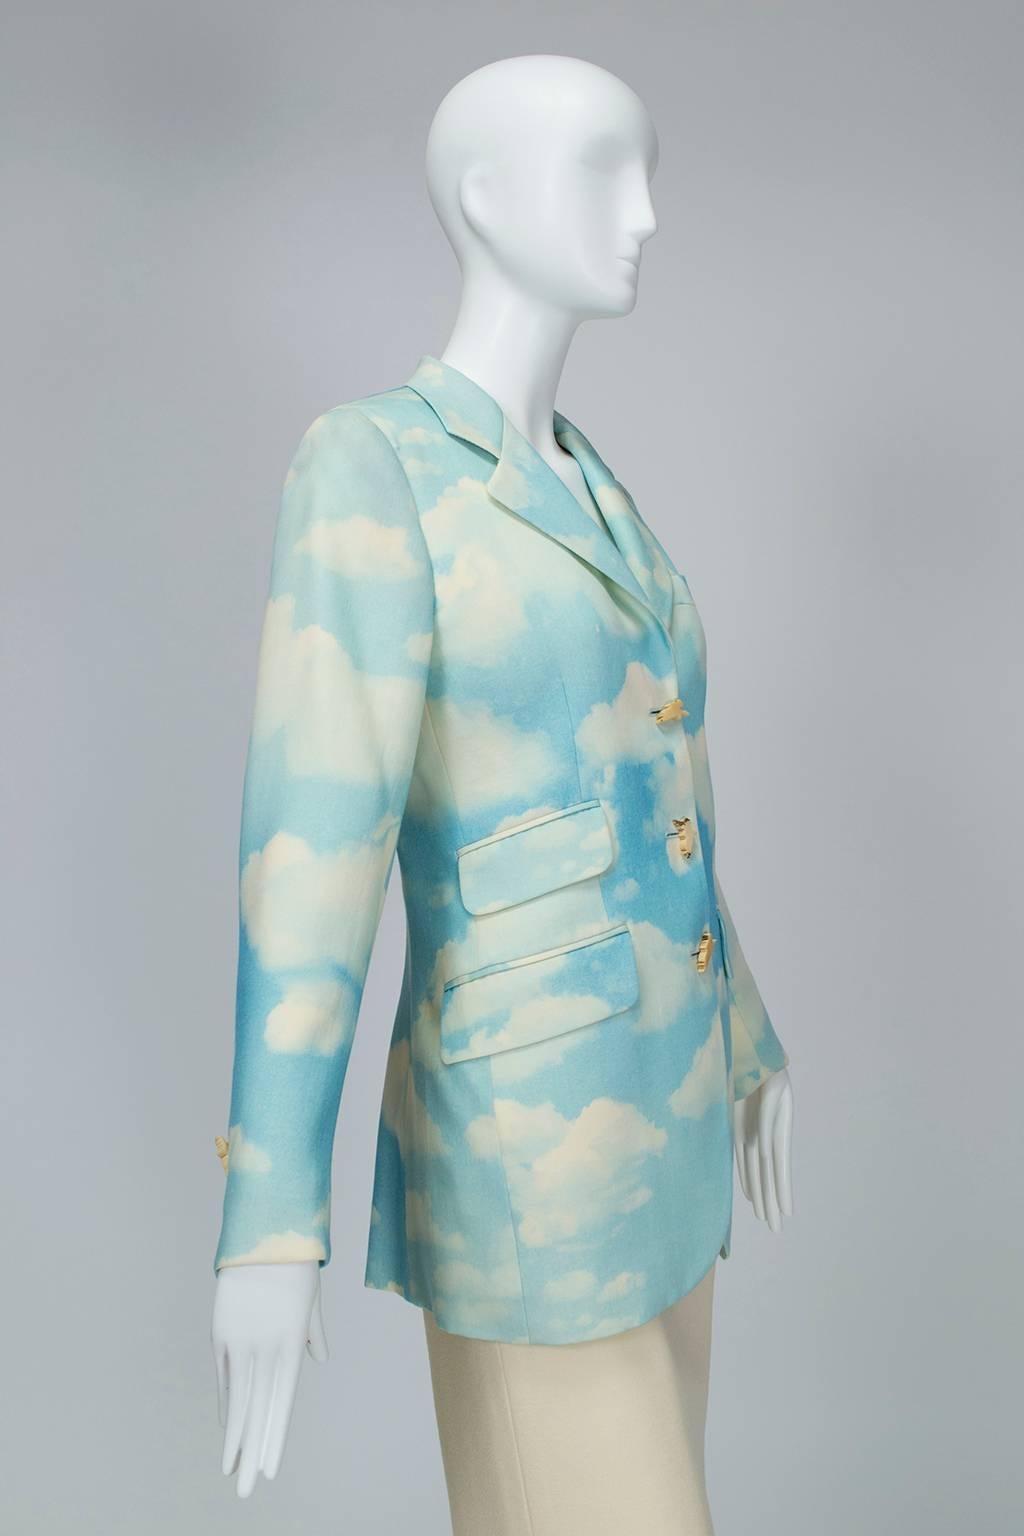 Perfect for wearing to an art gallery or simply to bring the outdoors inside, this jacket is covered in the cloudy blue sky pattern René Magritte featured in so many of his paintings; the carved angel buttons add a further celestial touch.

Vintage